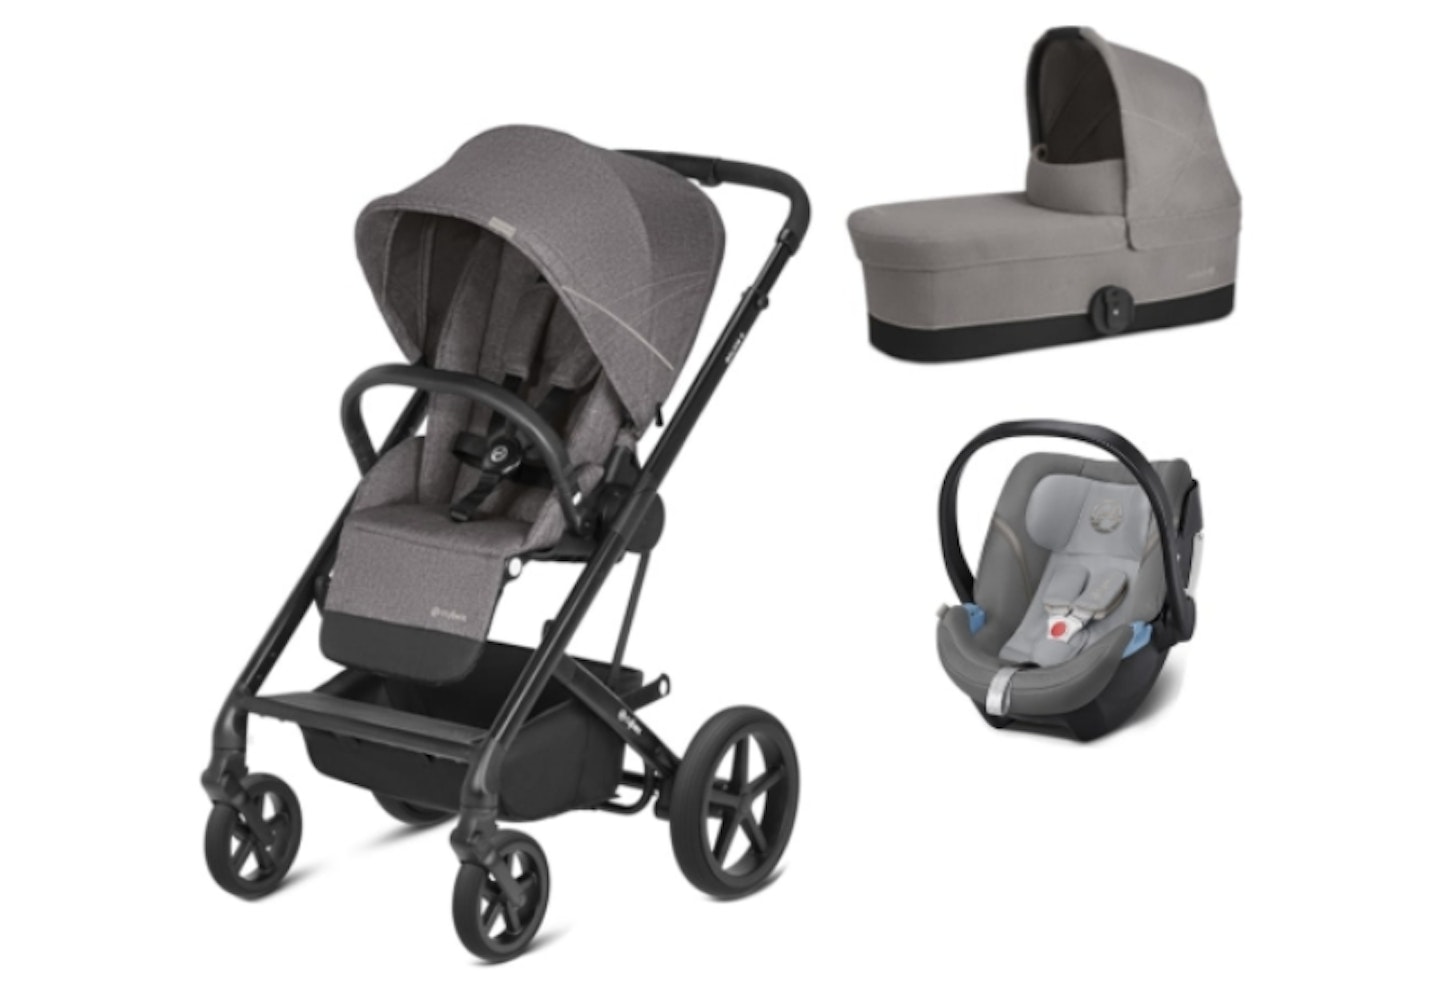 Balios S 3-in-1 Travel System review